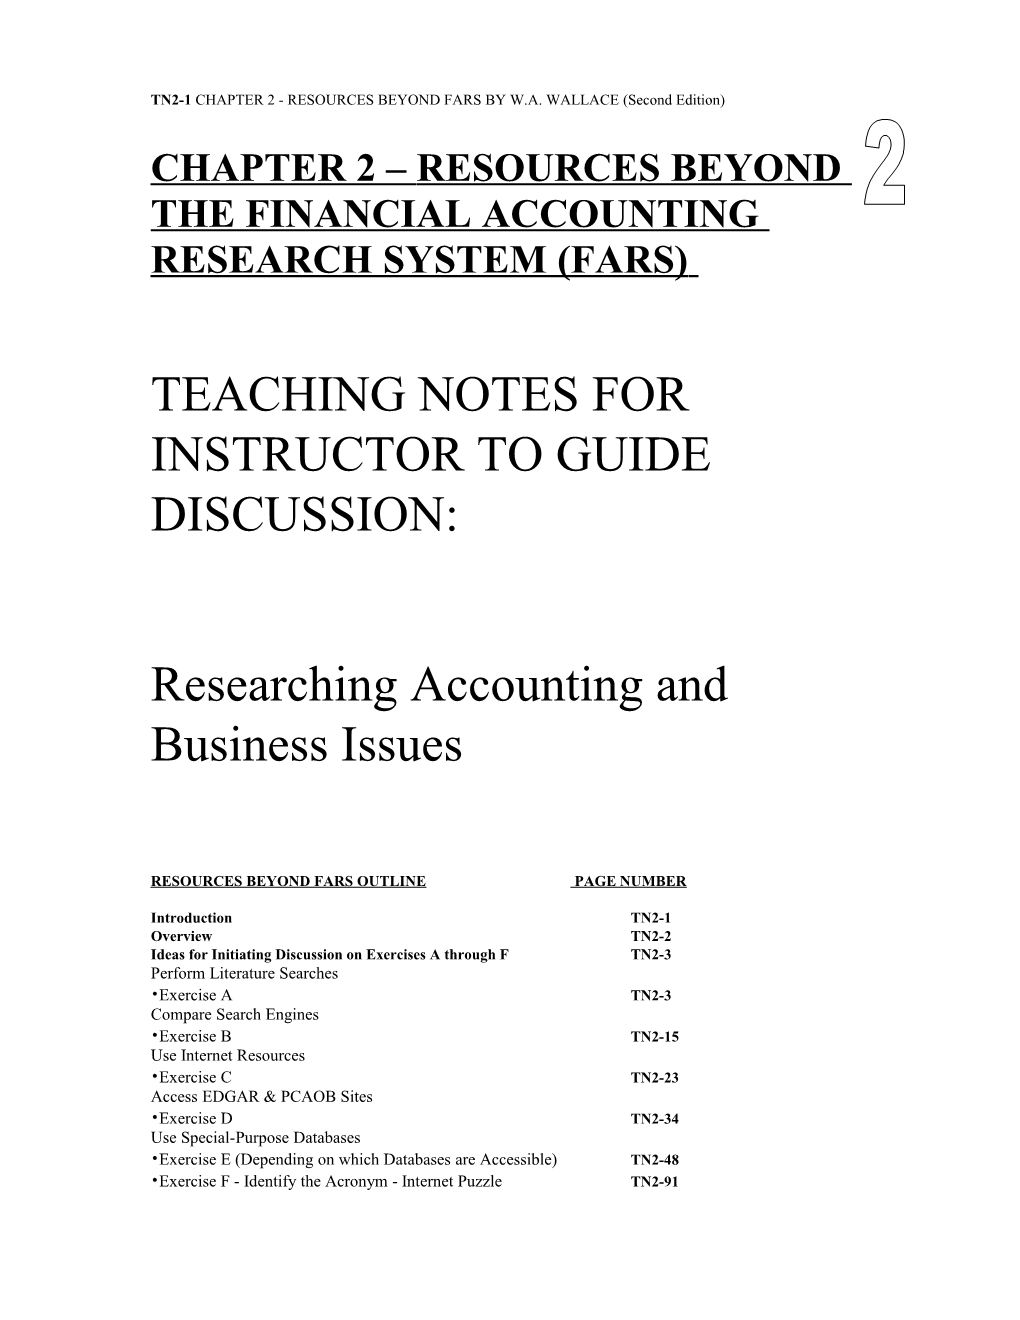 Chapter 2 Resources Beyond the Financial Accounting Research System (Fars)